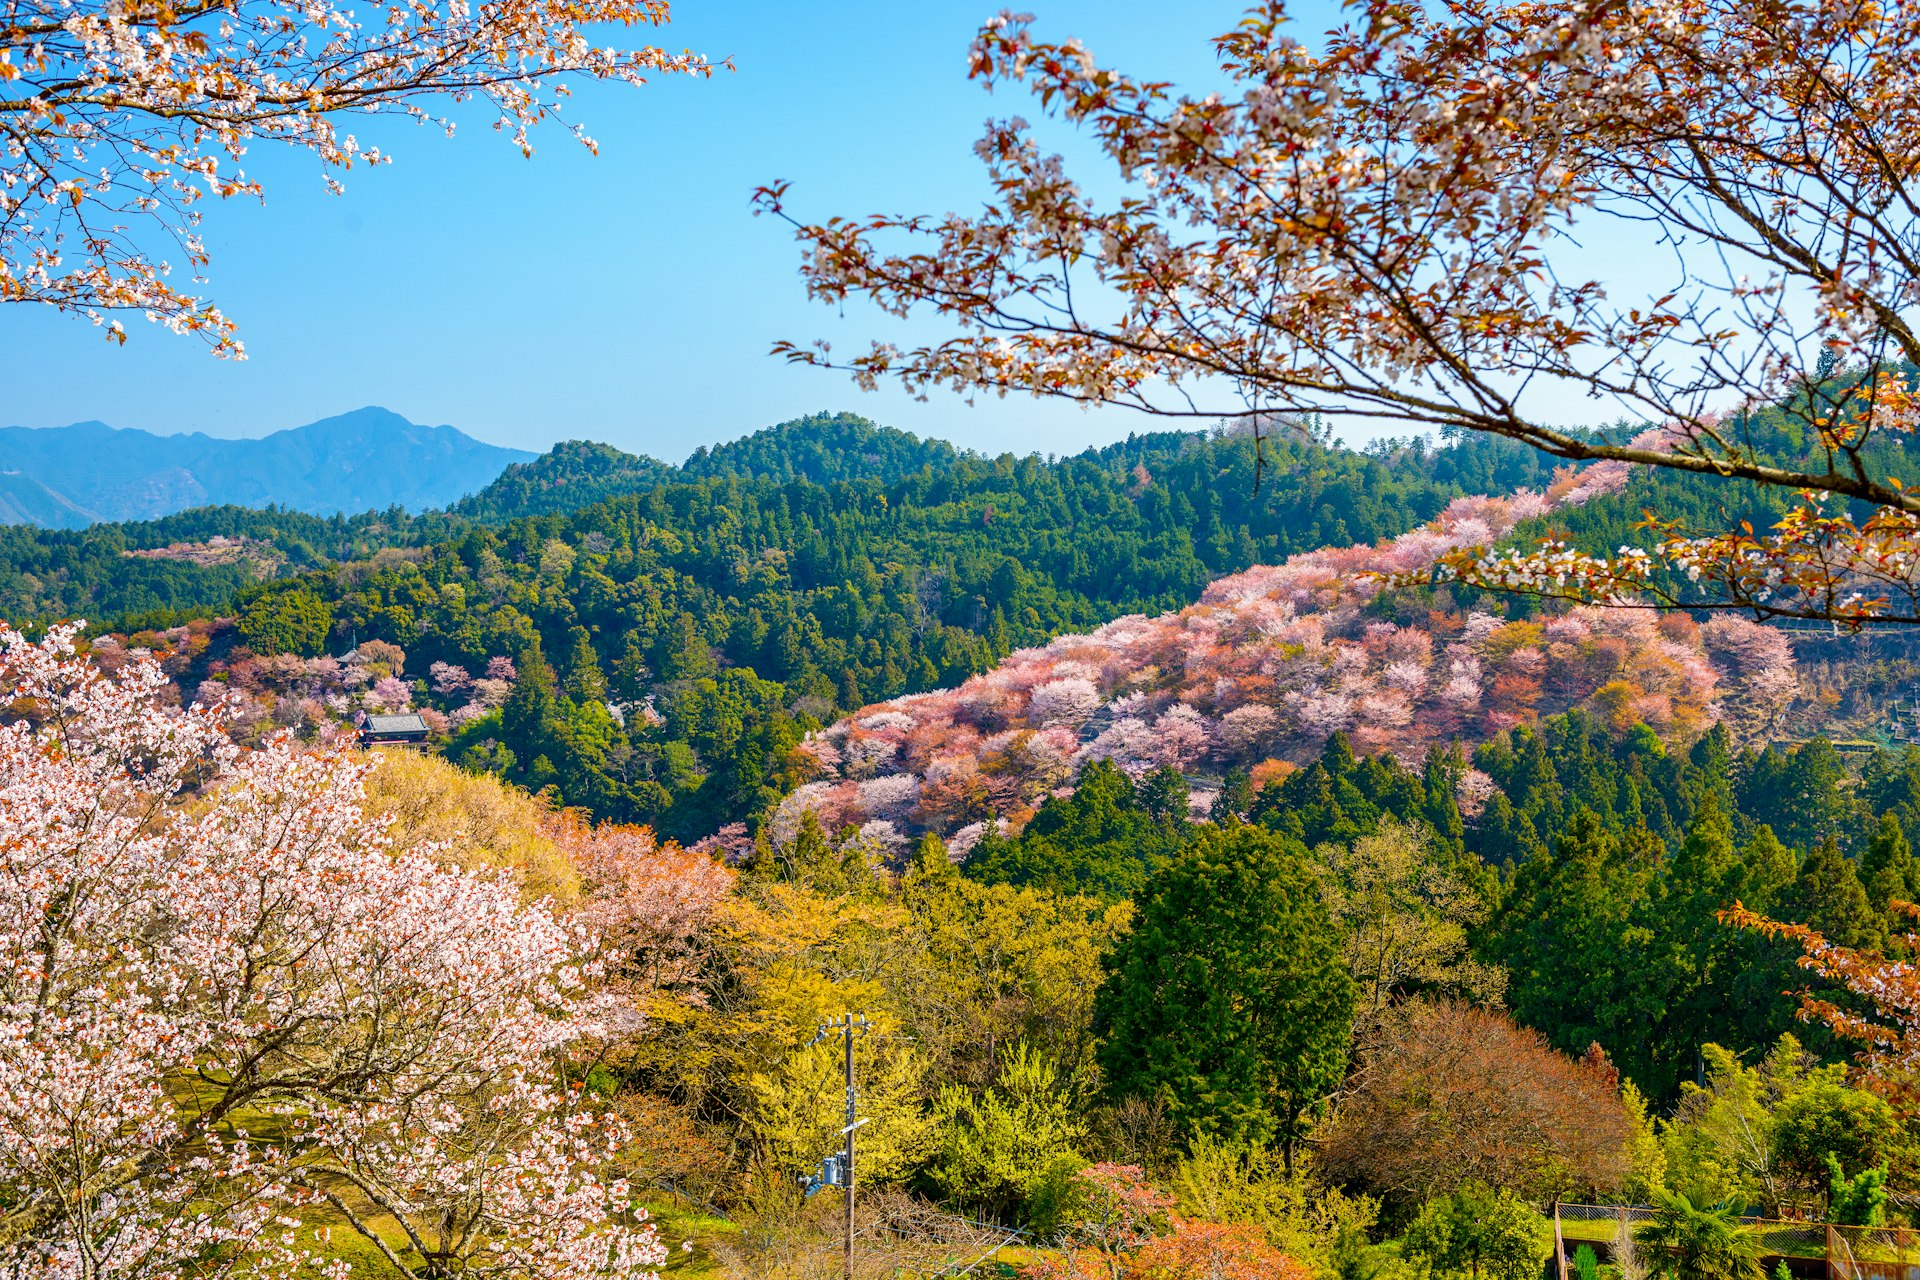 A valley covered in pink and white cherry blossom trees in bloom